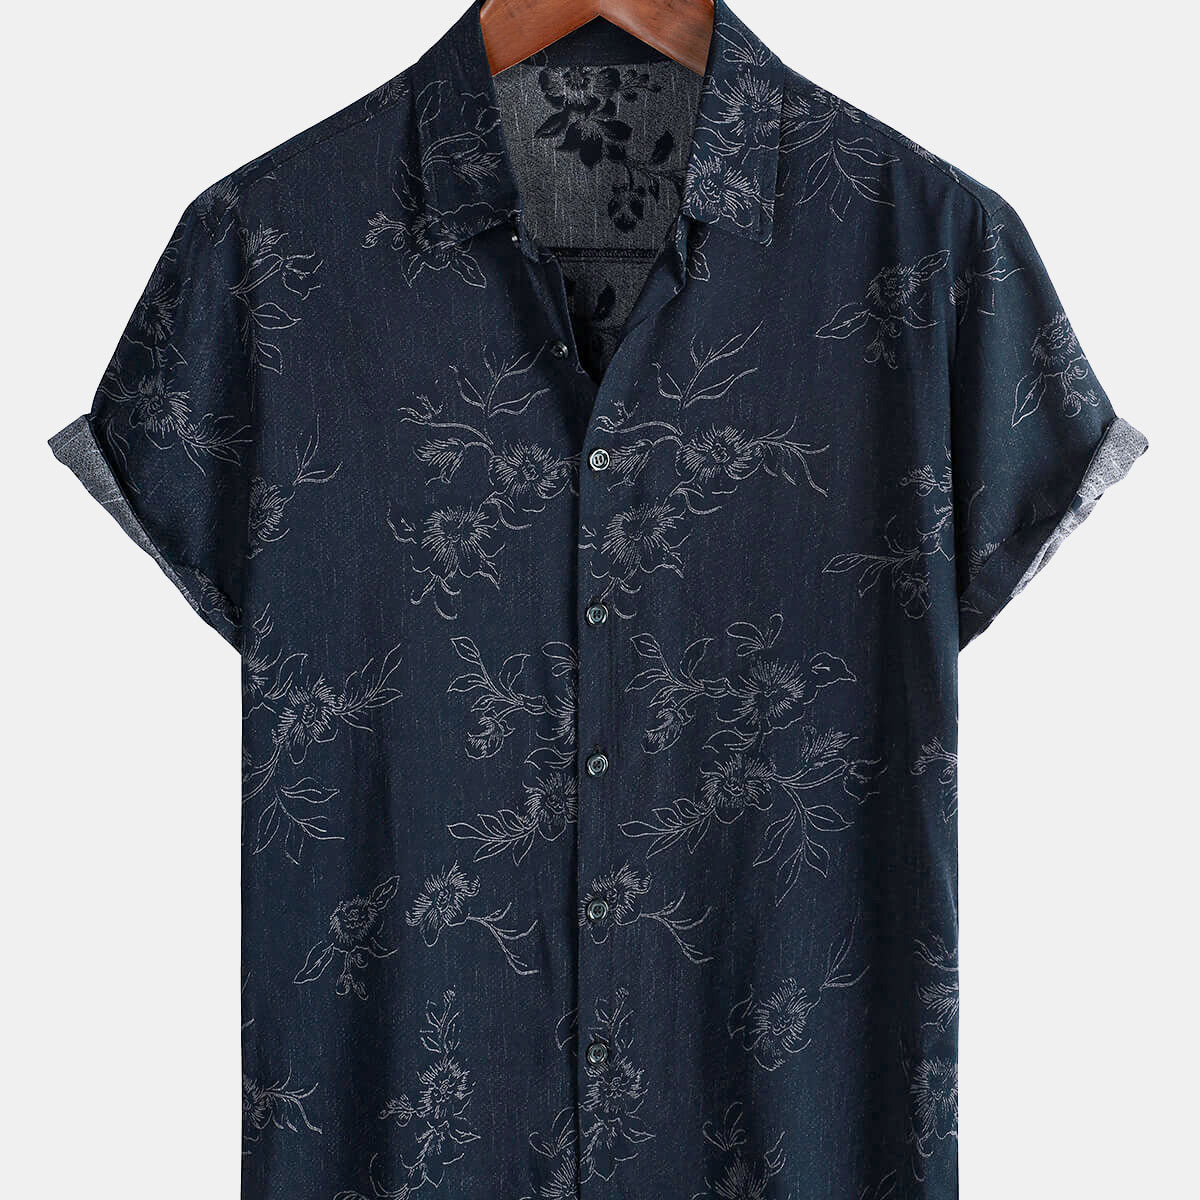 Men's Floral Holiday Casual Summer Short Sleeve Navy Blue Button Up Shirt